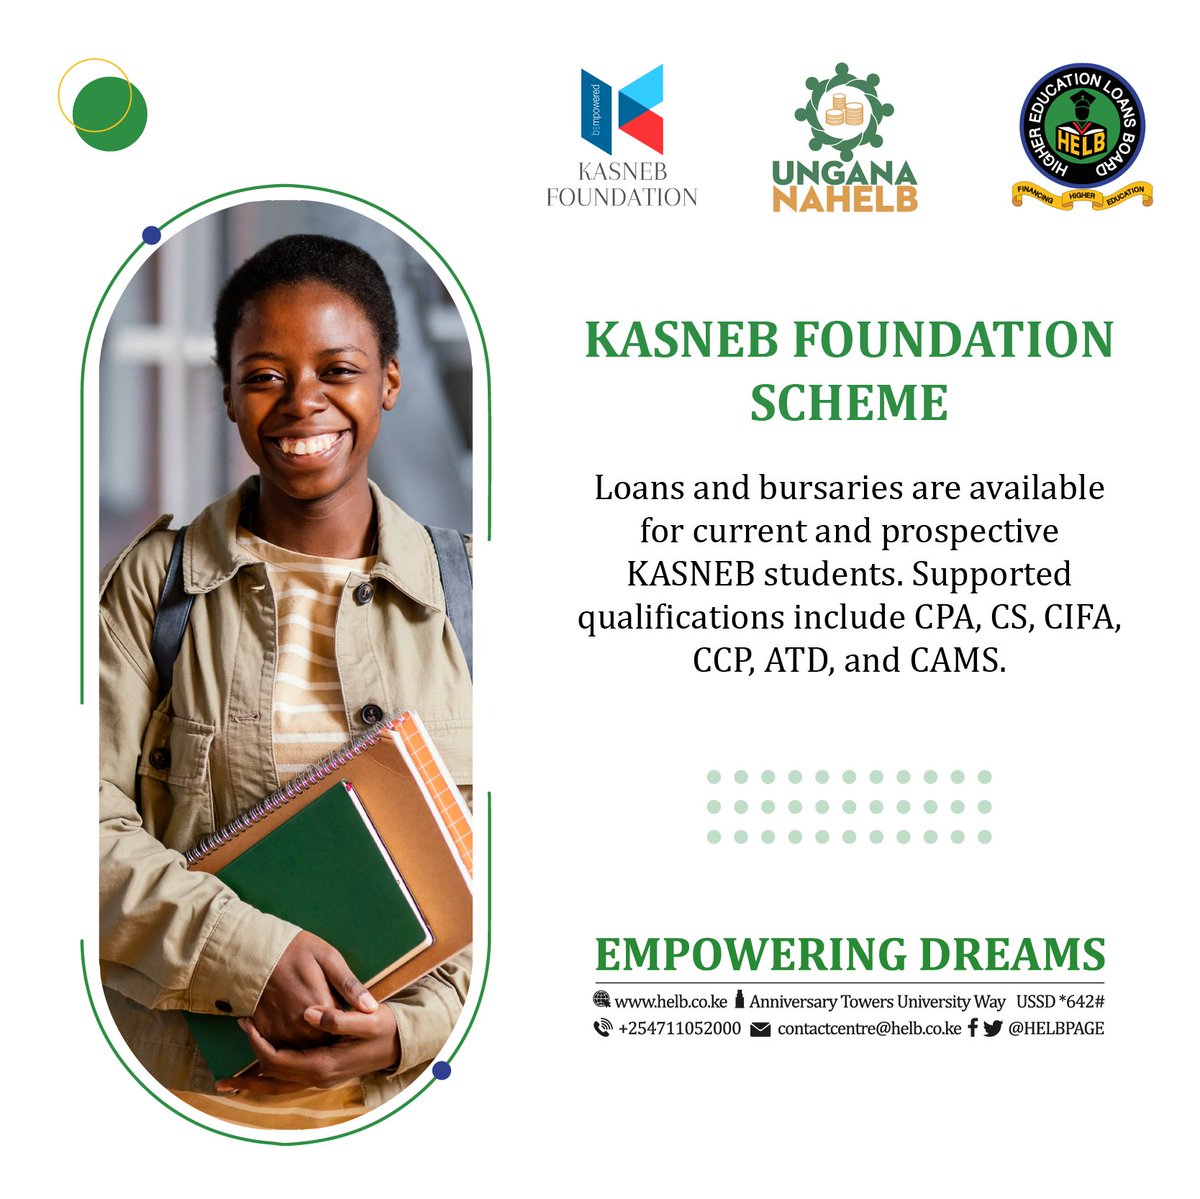 Are you pursuing any of the KASNEB qualifications but facing financial limits? We're here to turn your dreams into reality. Click here to apply for the KASNEB Foundation Scheme: bit.ly/3wYzYX9. #EmpoweringDreams